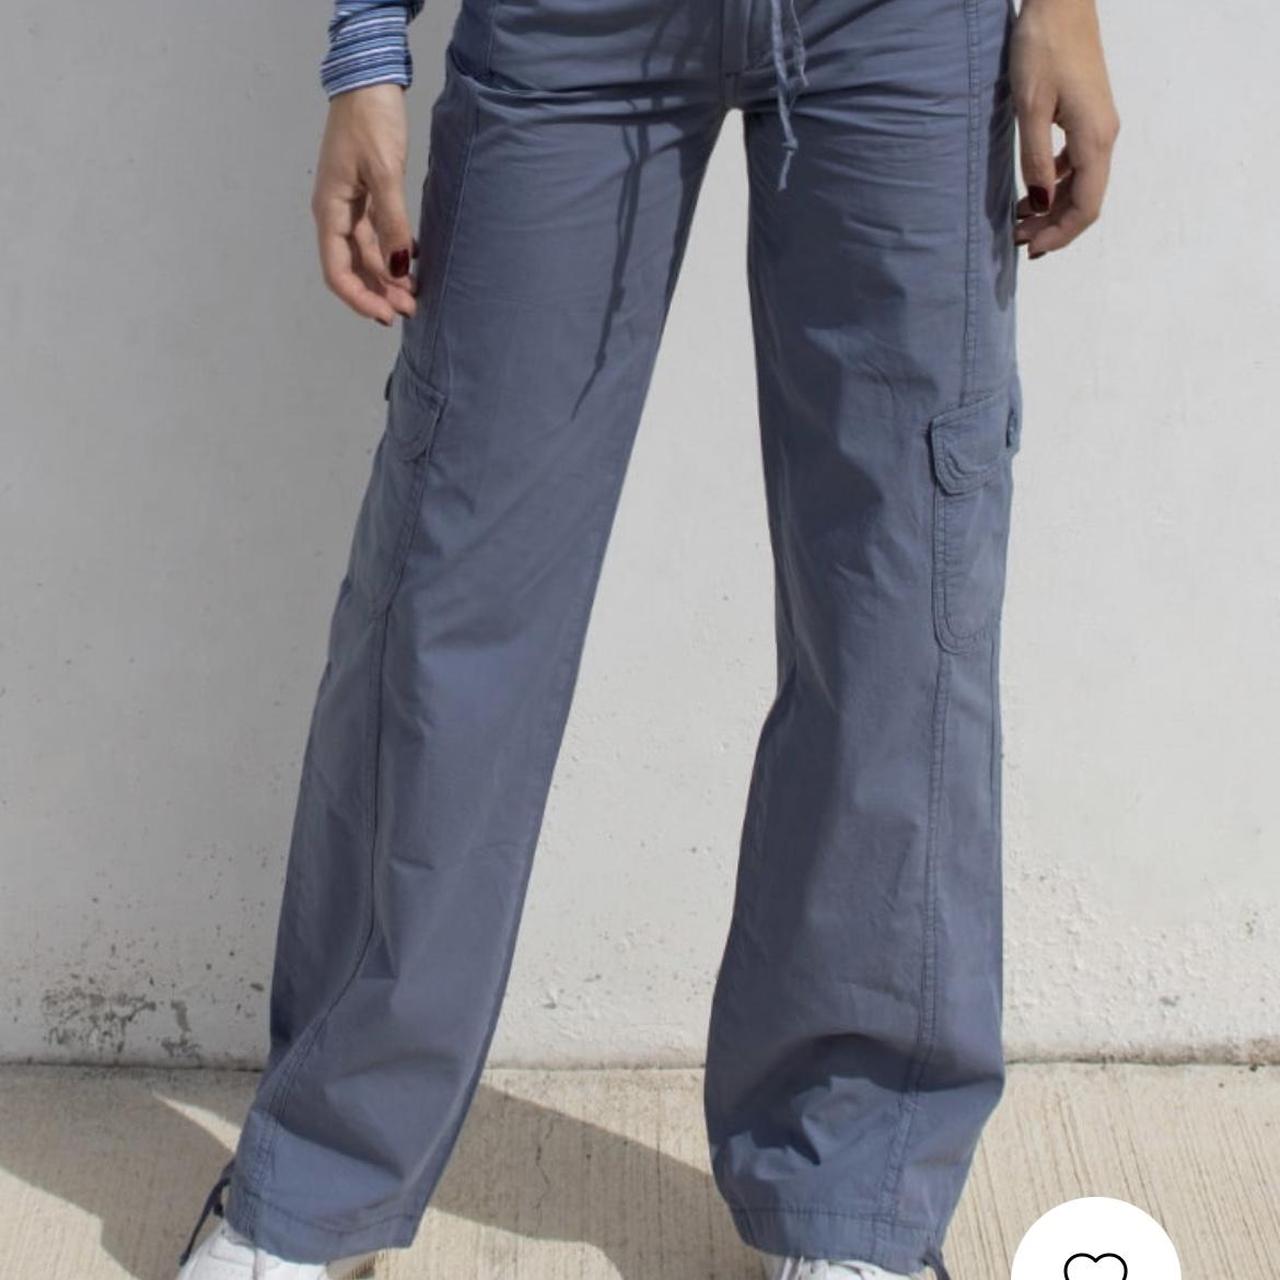 Gorgeous SUBDUED cargo pants in this lovely blue - Depop